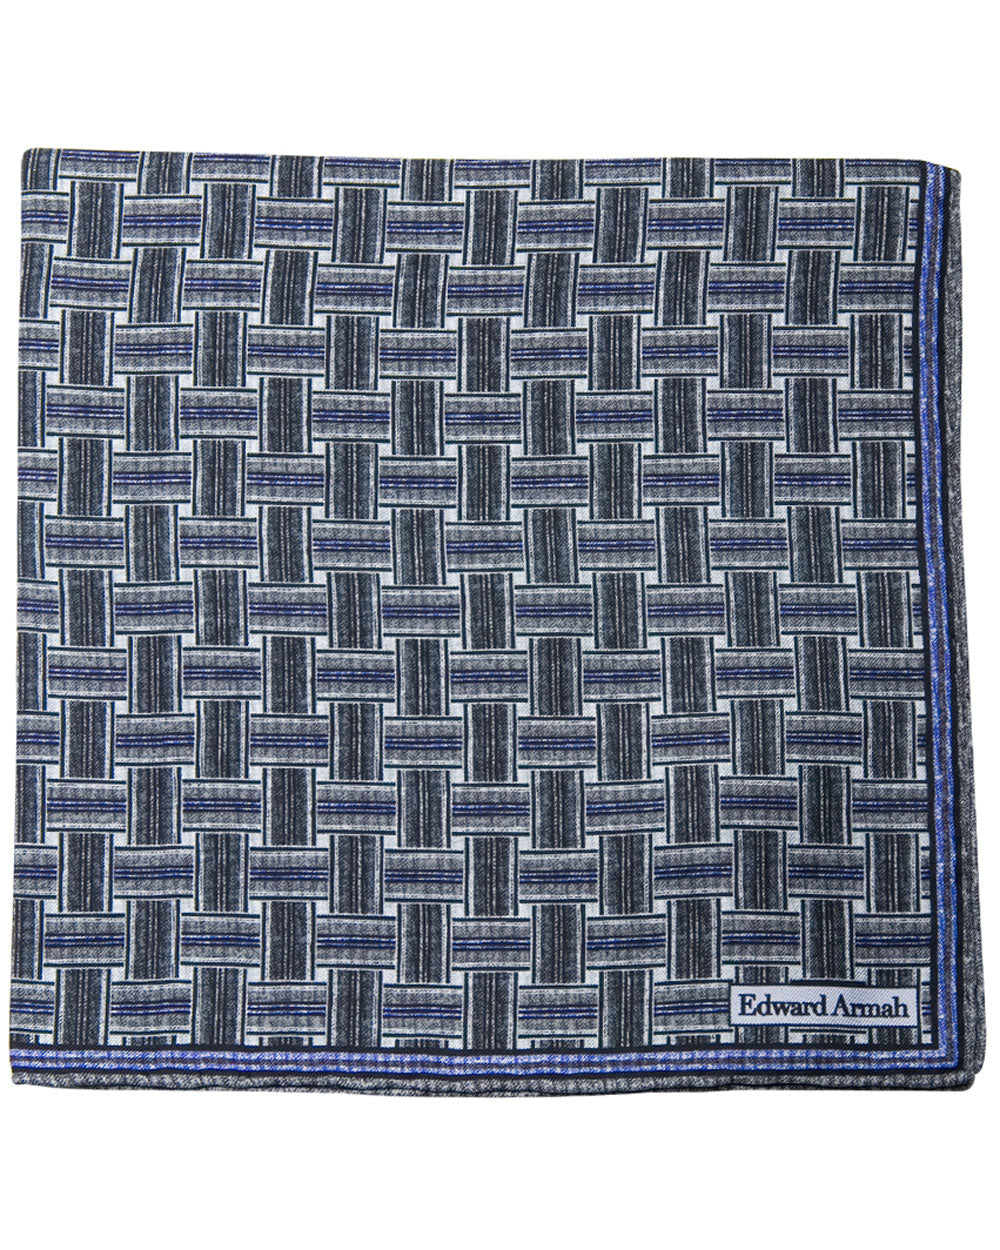 African Cloth Inspired Pocket Square in Black and White